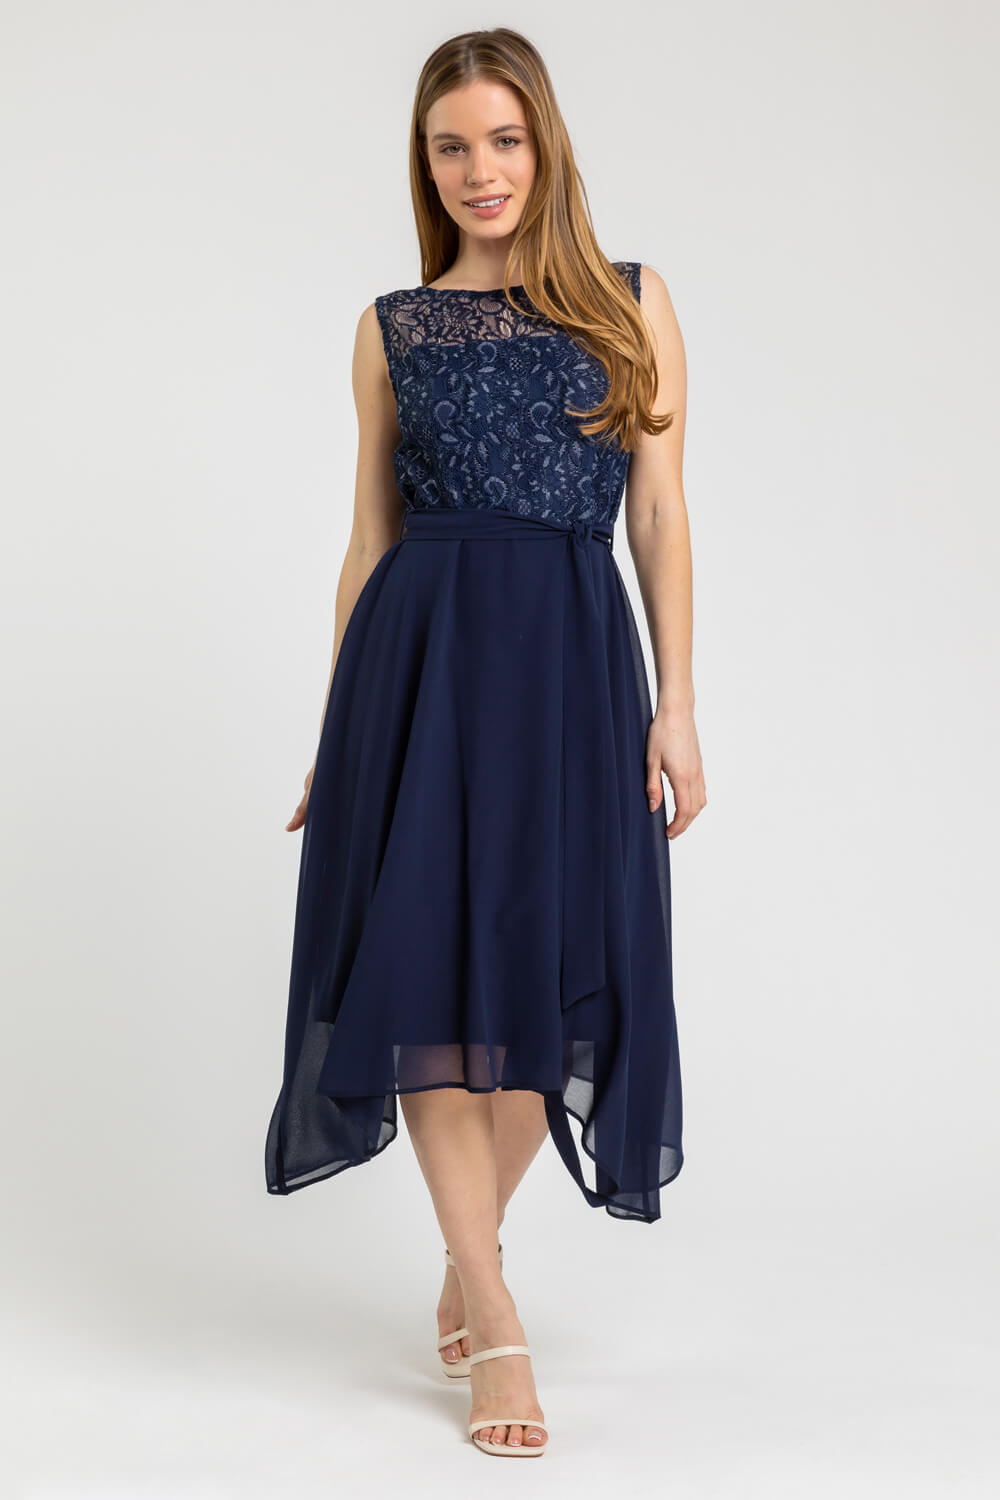 Petite Lace Detail Fit And Flare Dress in Navy - Roman Originals UK